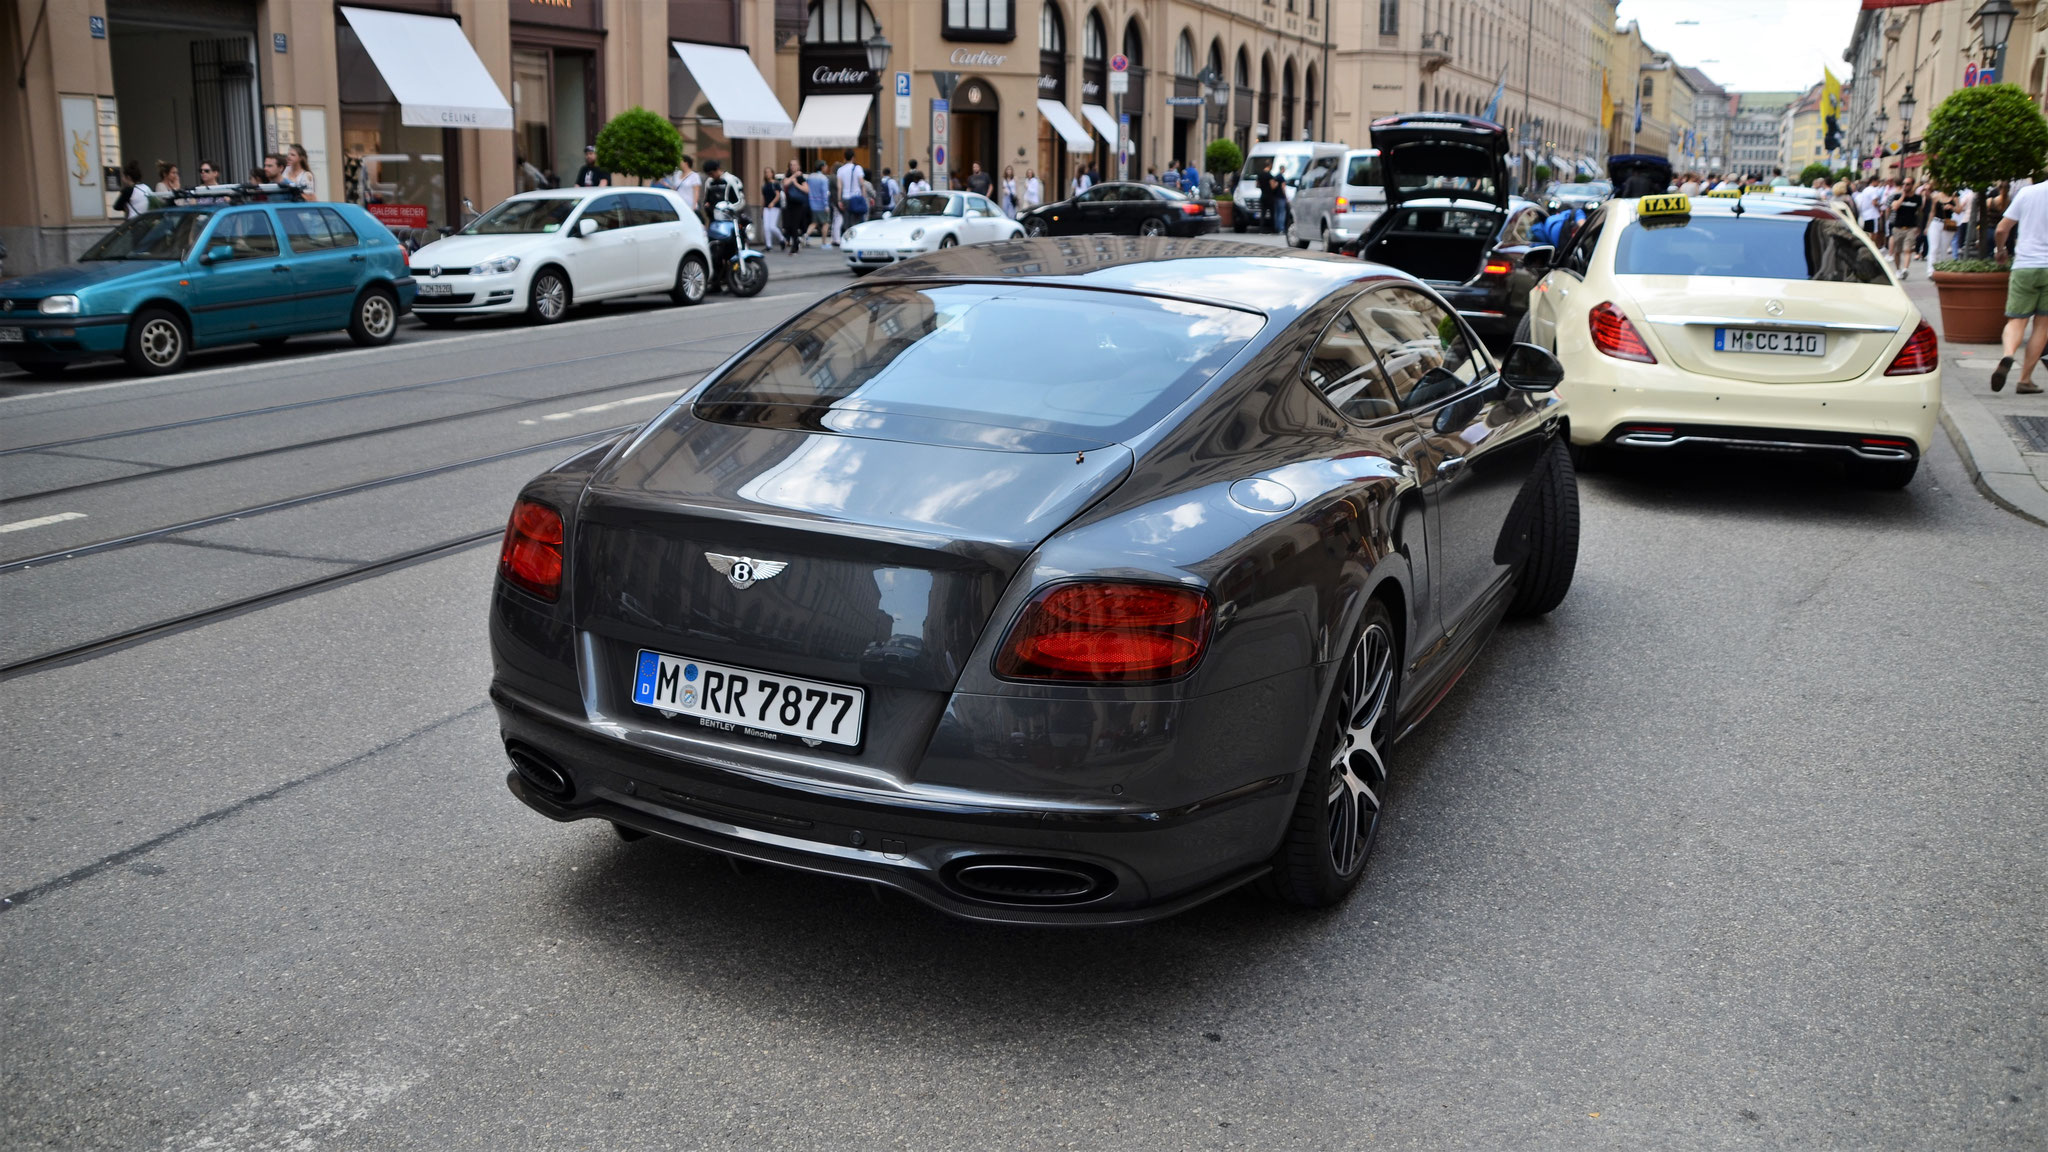 Bentley Continental GT Supersports - M-RR-7877